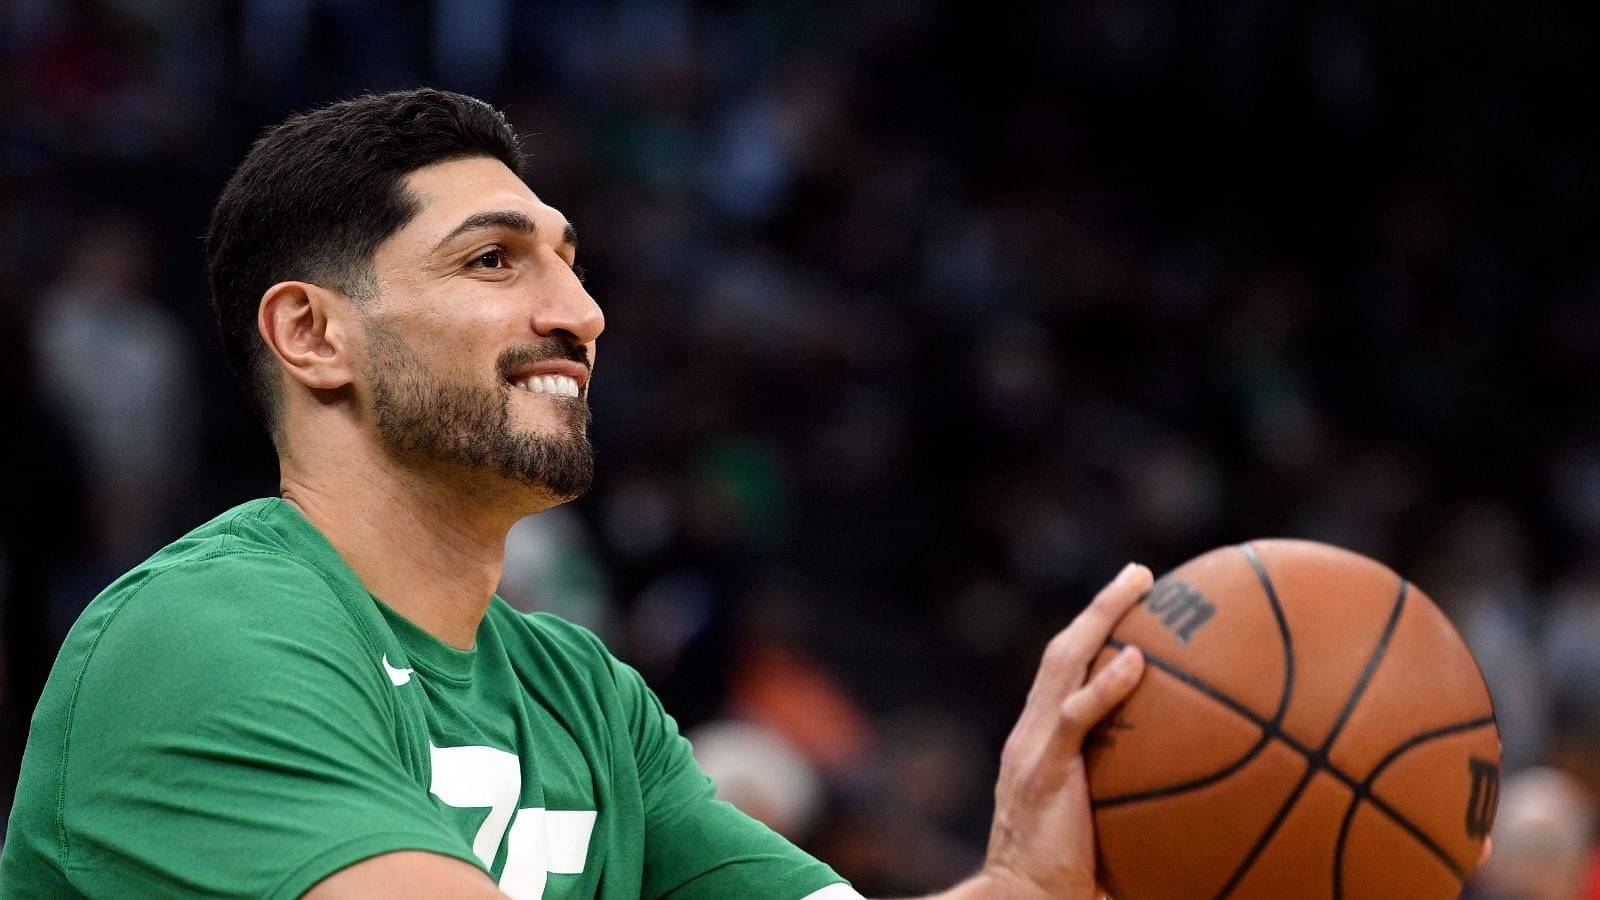 "Ain’t no way Enes Freedom is splashing threes on the Nets": NBA Twitter goes on a frenzy as Celtics center swishes a three while nets extend their losing streak to 9 games